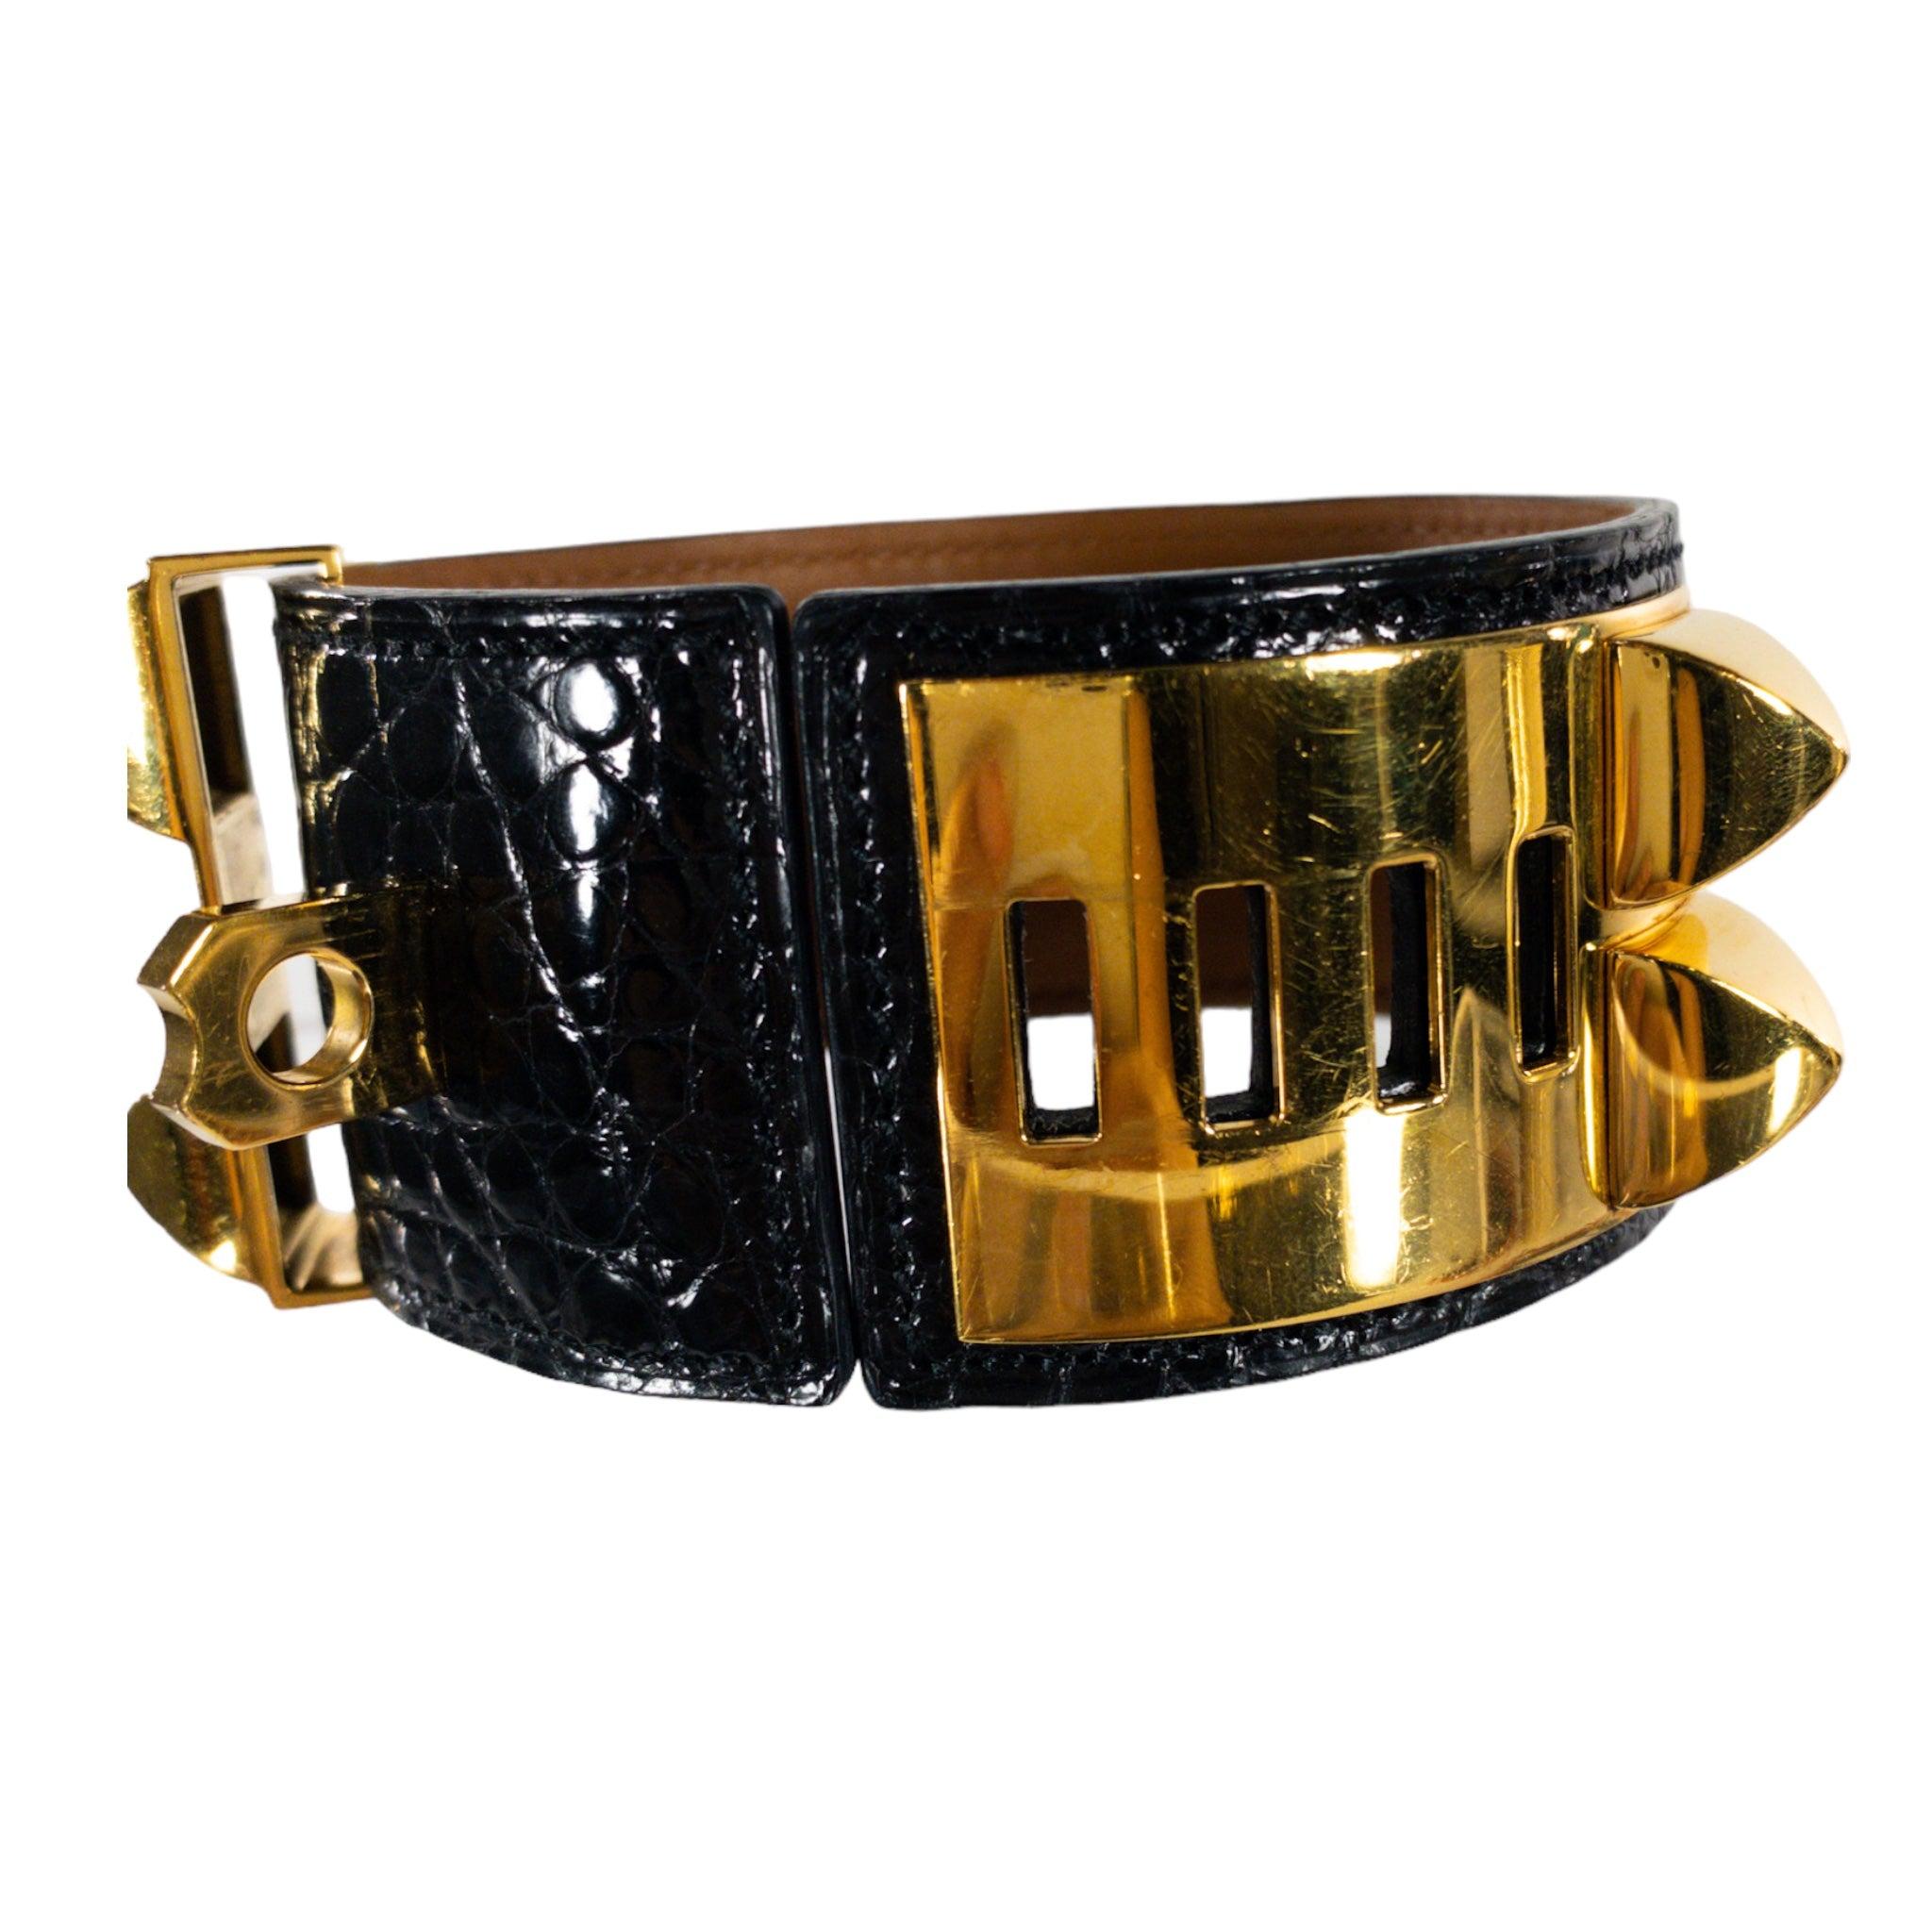 Hermes Black Crocodile CDC Collier de Chien GHW

This is an authentic Hermès Collier de Chien or 'CDC' bracelet. This cuff features black Shiny Crocodile skin and gold hardware with classic Hermes stud detail. 

Additional information:
Measurements: